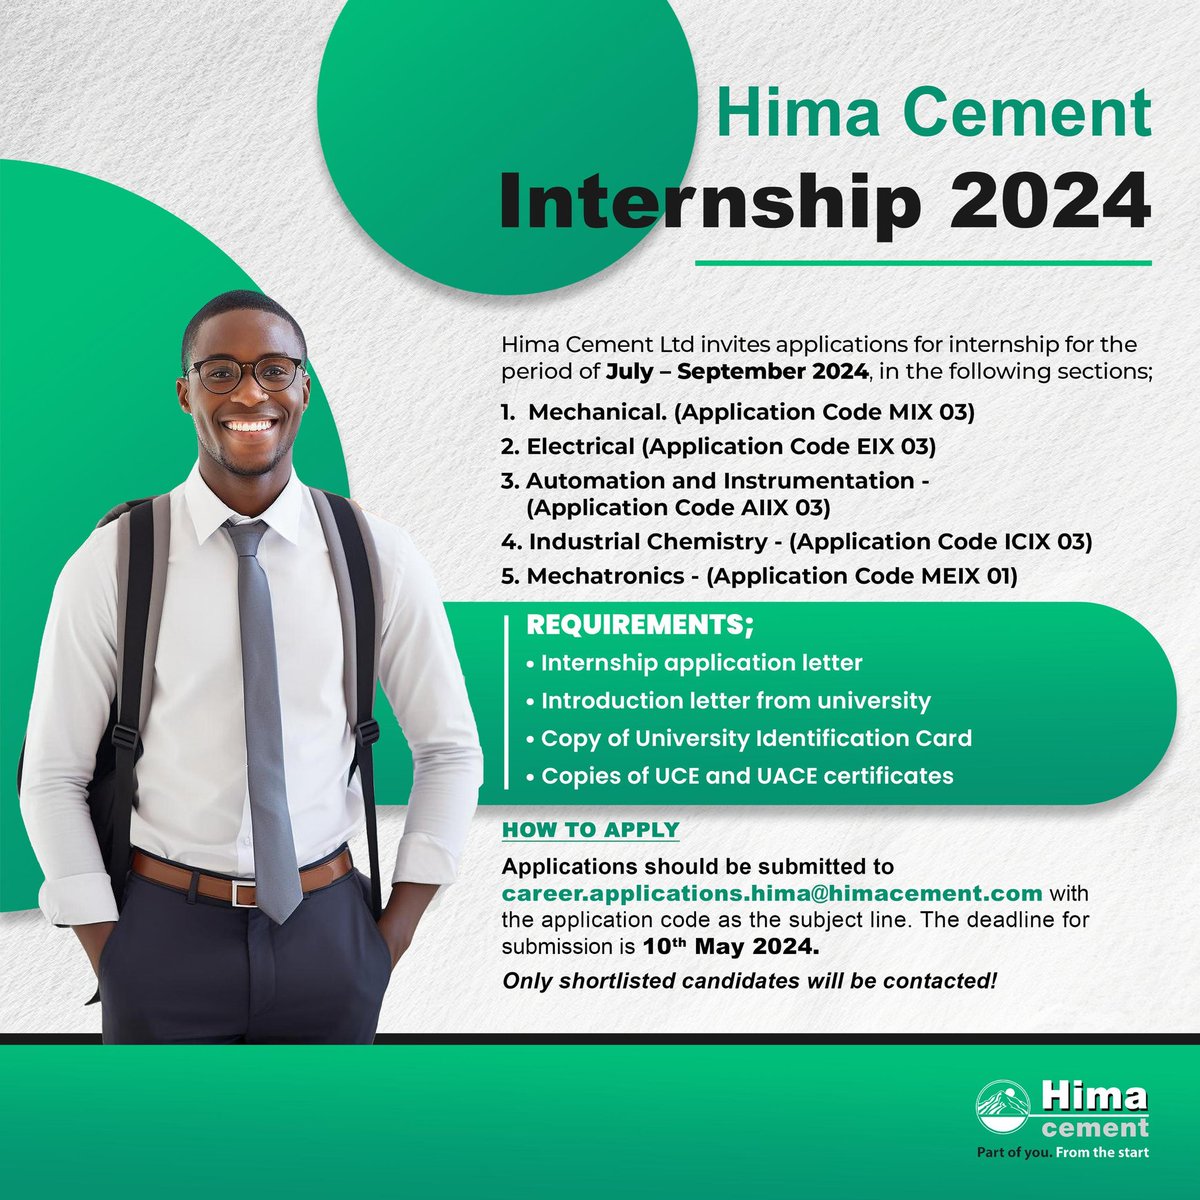 Several internship slots are available @HimaCement. Tell a friend to tell a friend with a retweet. #jobclinicug #Internship #ApplyNow #careers #internees